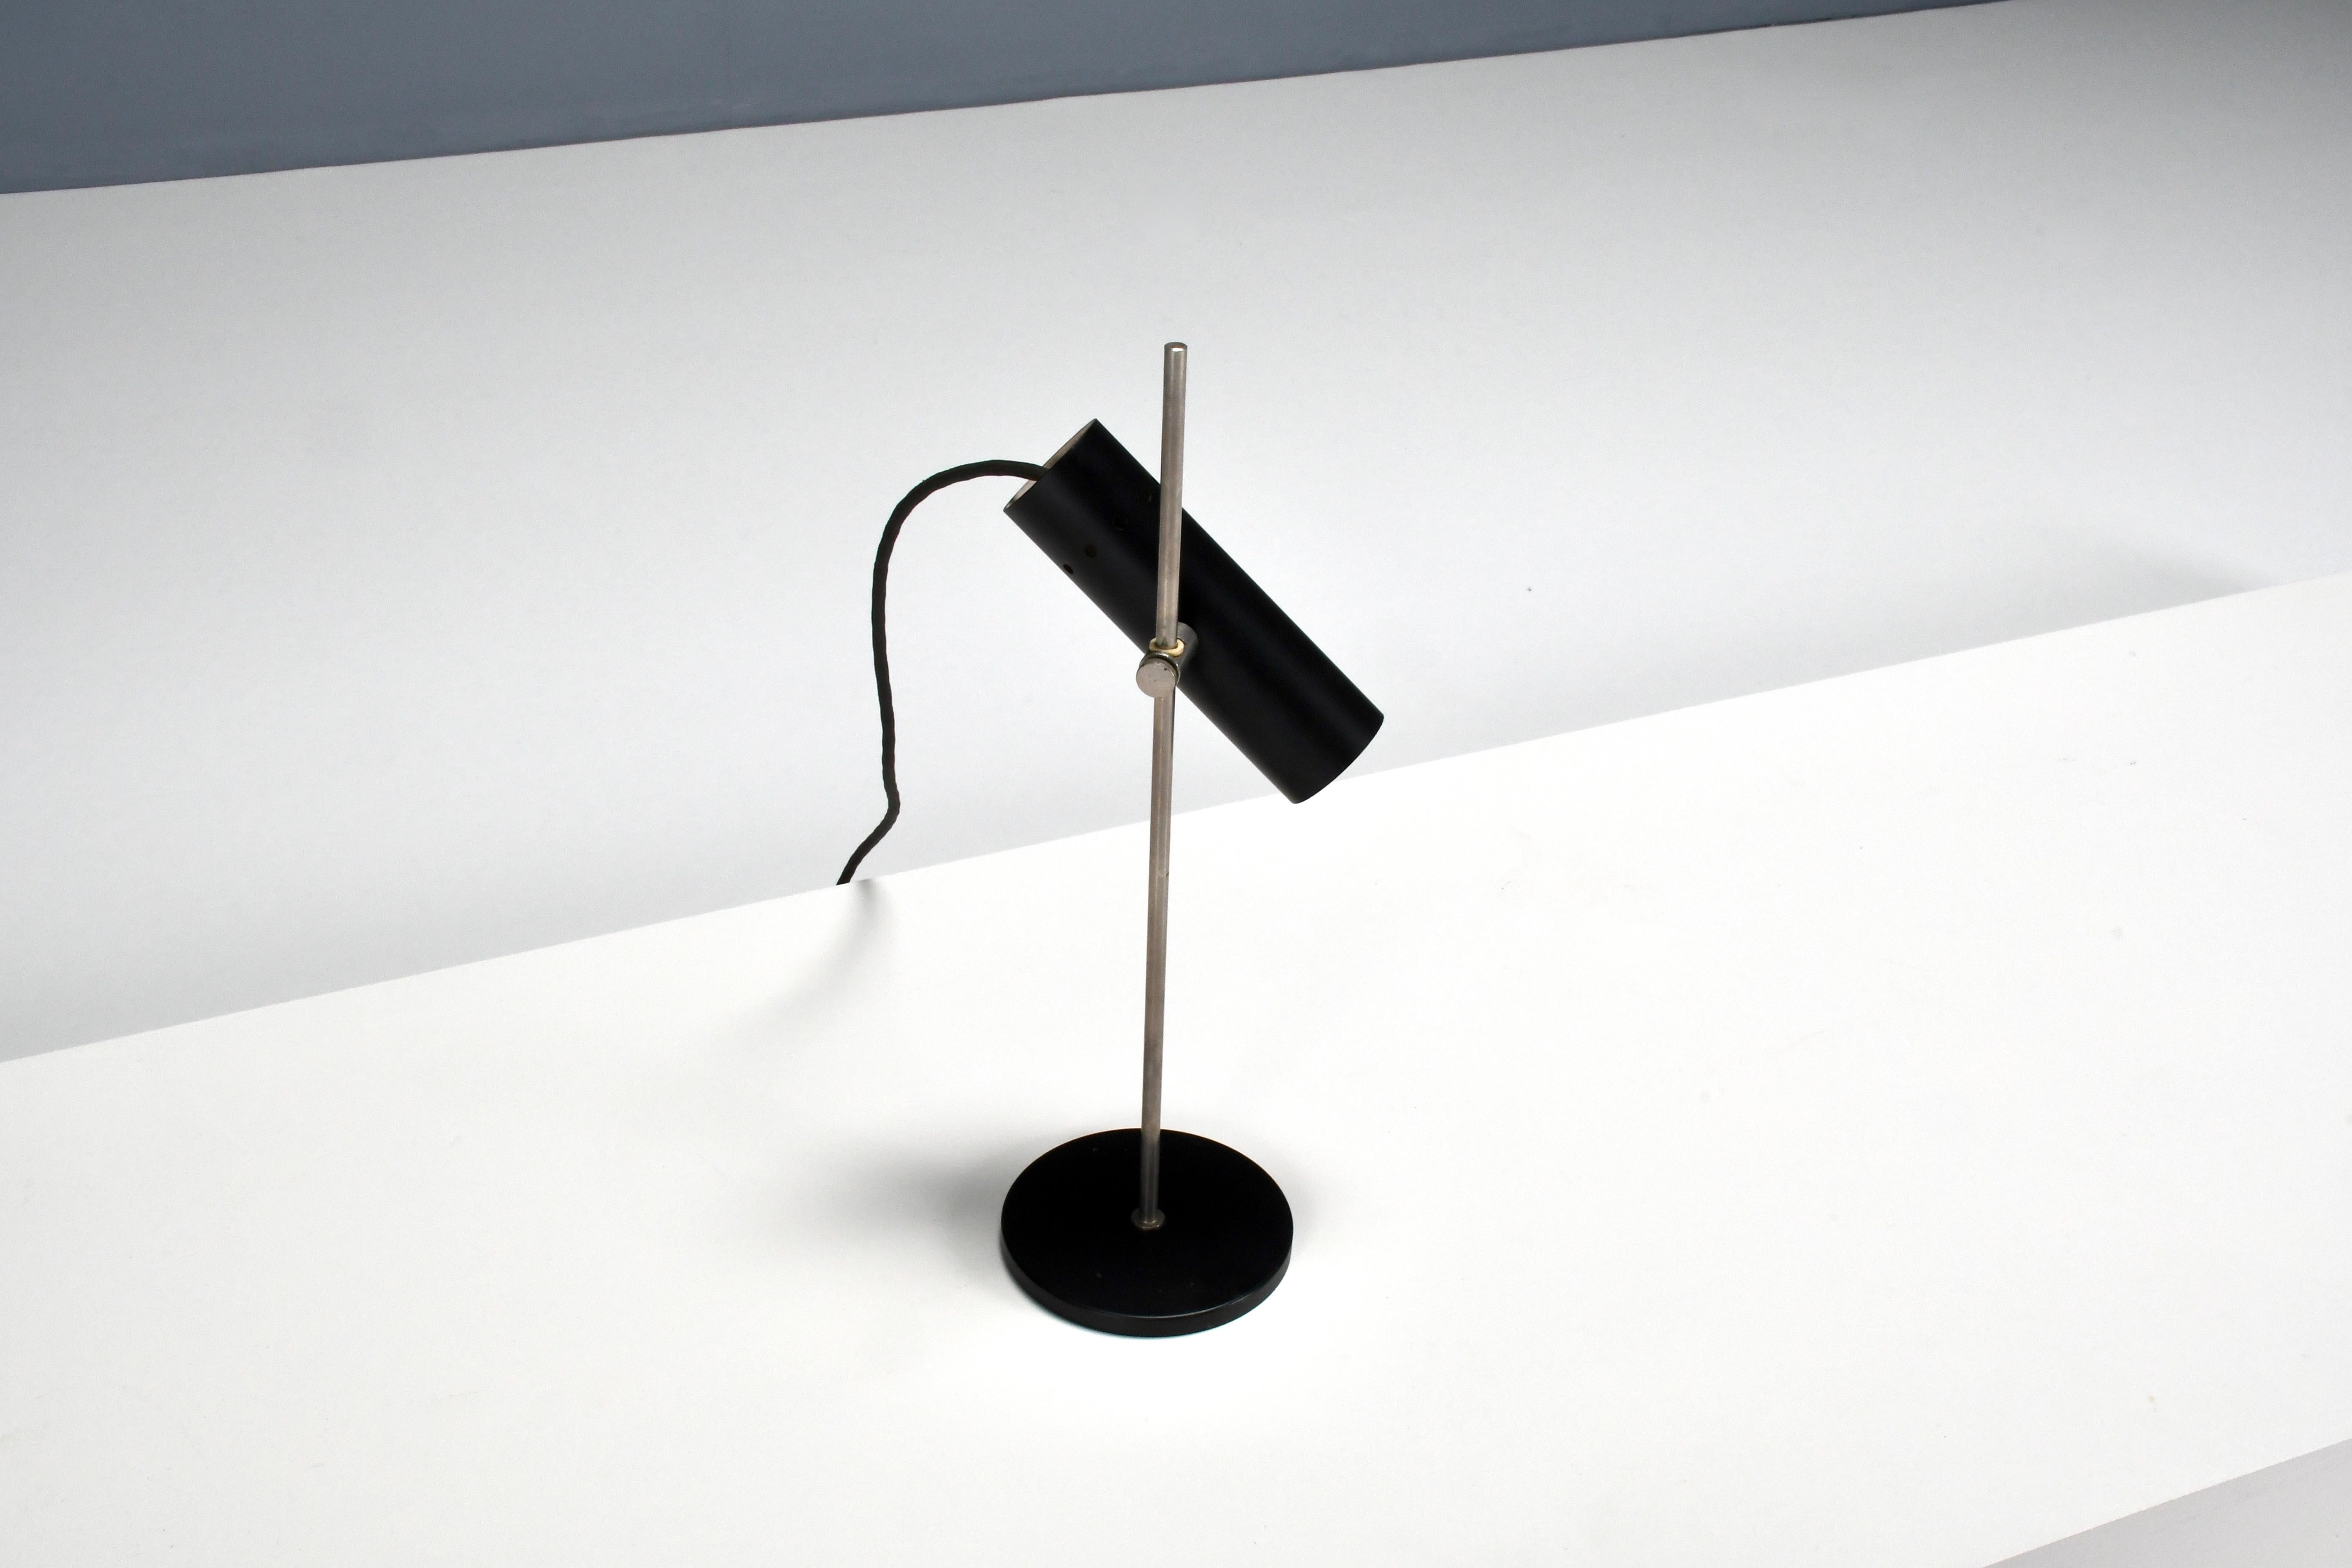 Compact minimalist French table lamp in good condition. 

Designed by Alain Richard in the 1950s 

Manufactured by Disderot

The lamp has a black lacquered metal base which holds a chromed stem.

Connected to the stem is a tube shaped structure that